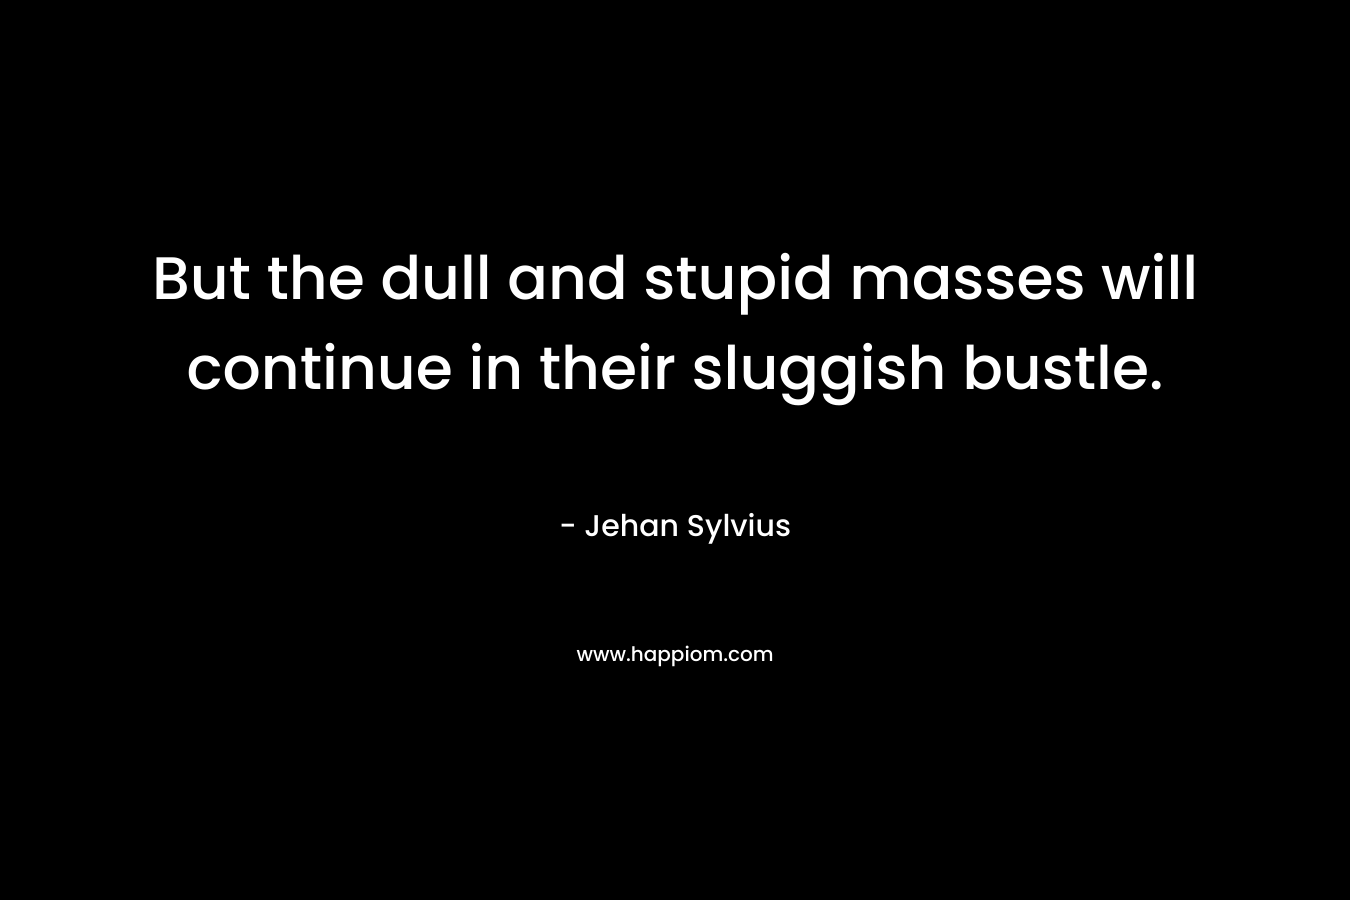 But the dull and stupid masses will continue in their sluggish bustle.